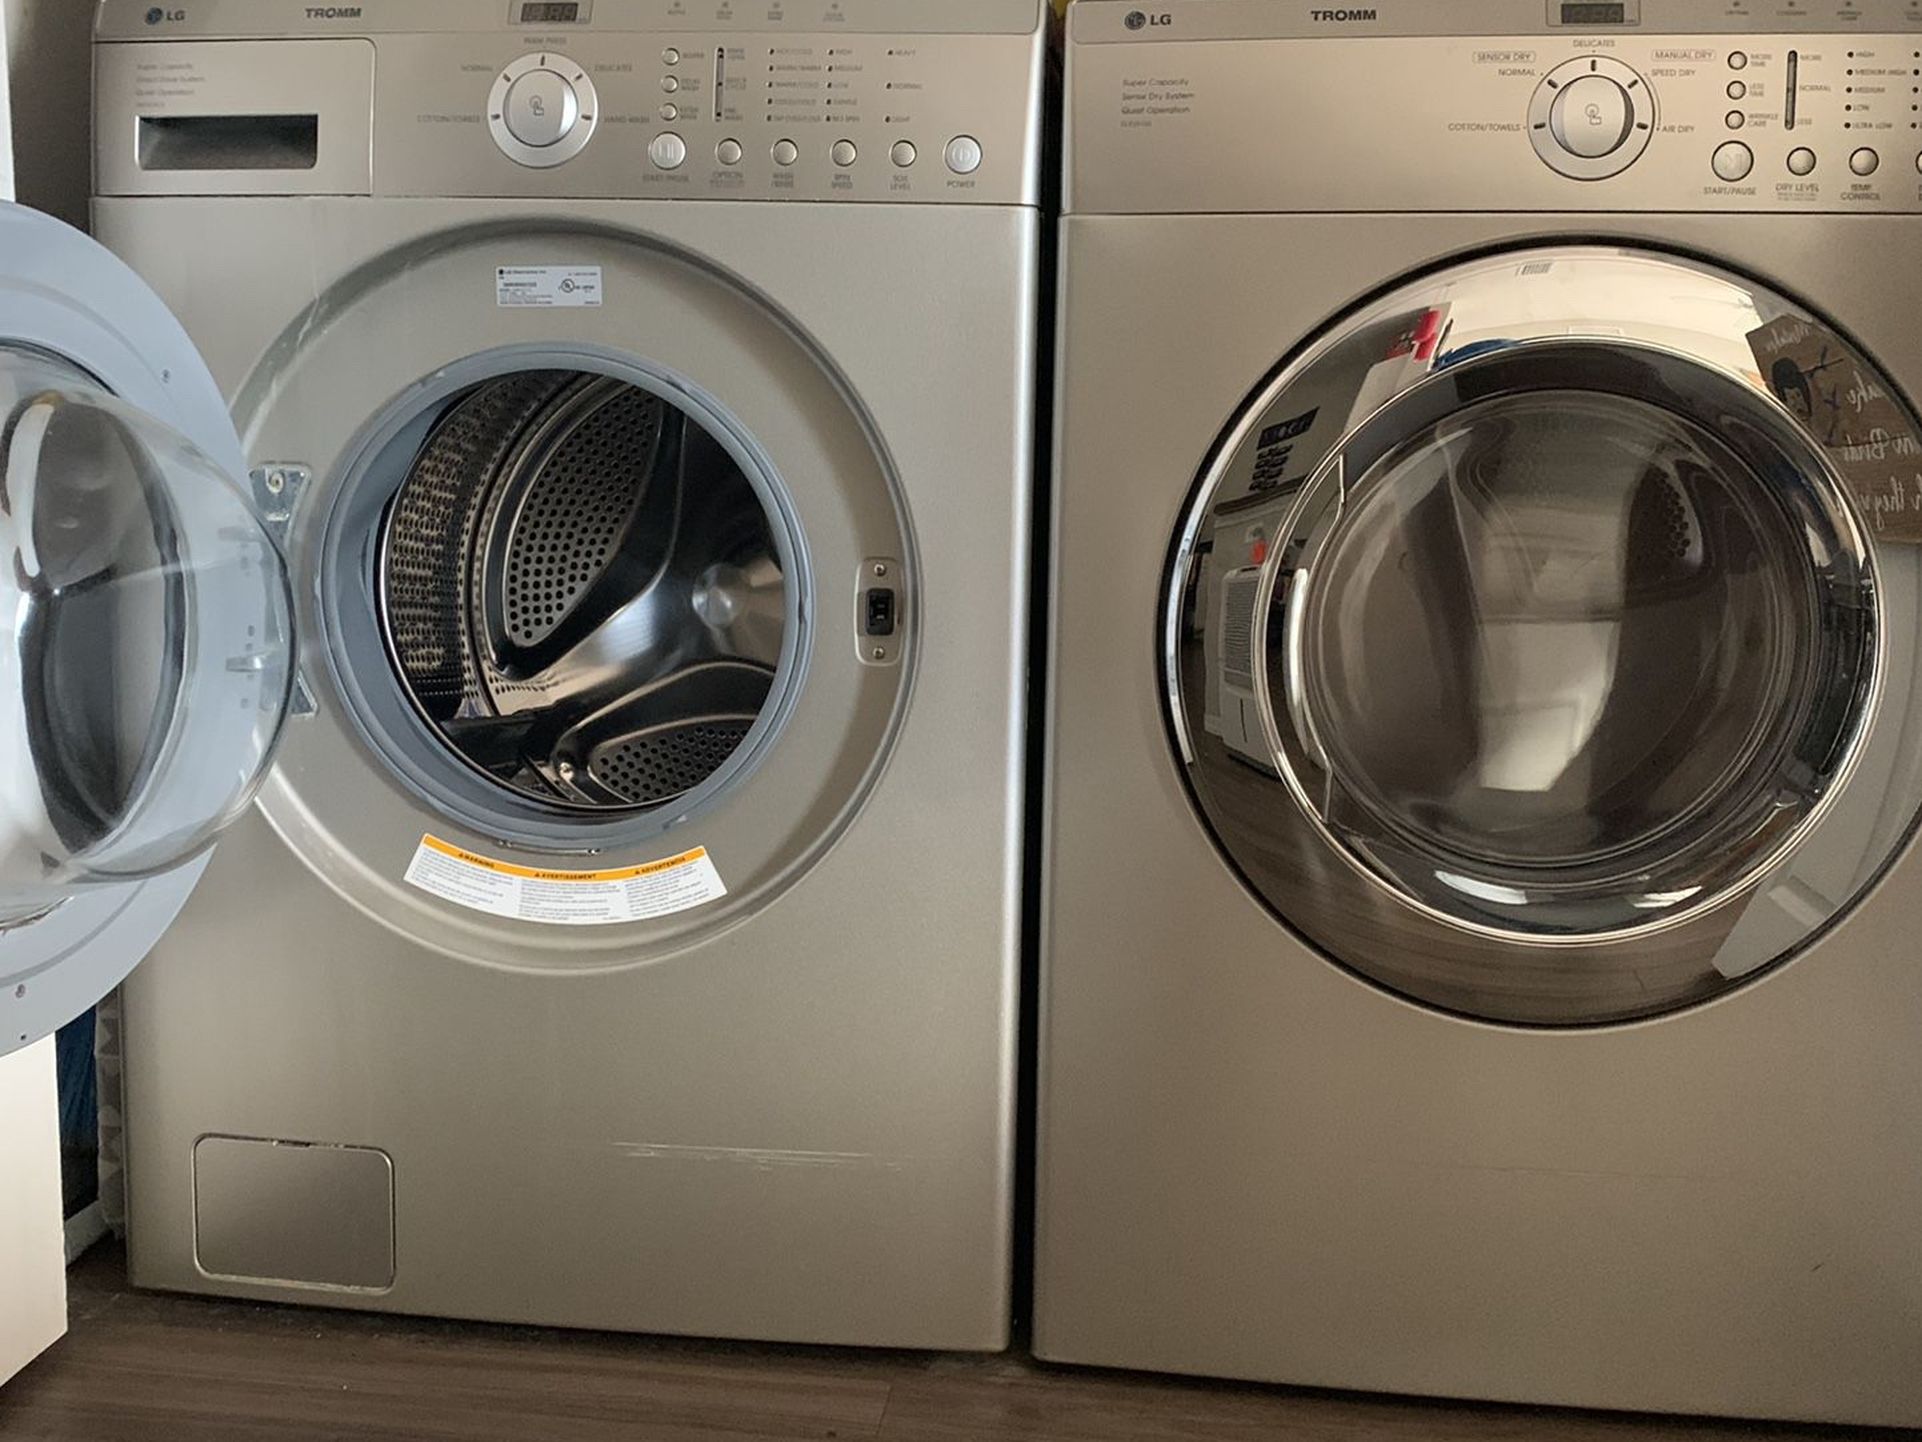 LG TROMM - Washer And Dryer - Electric